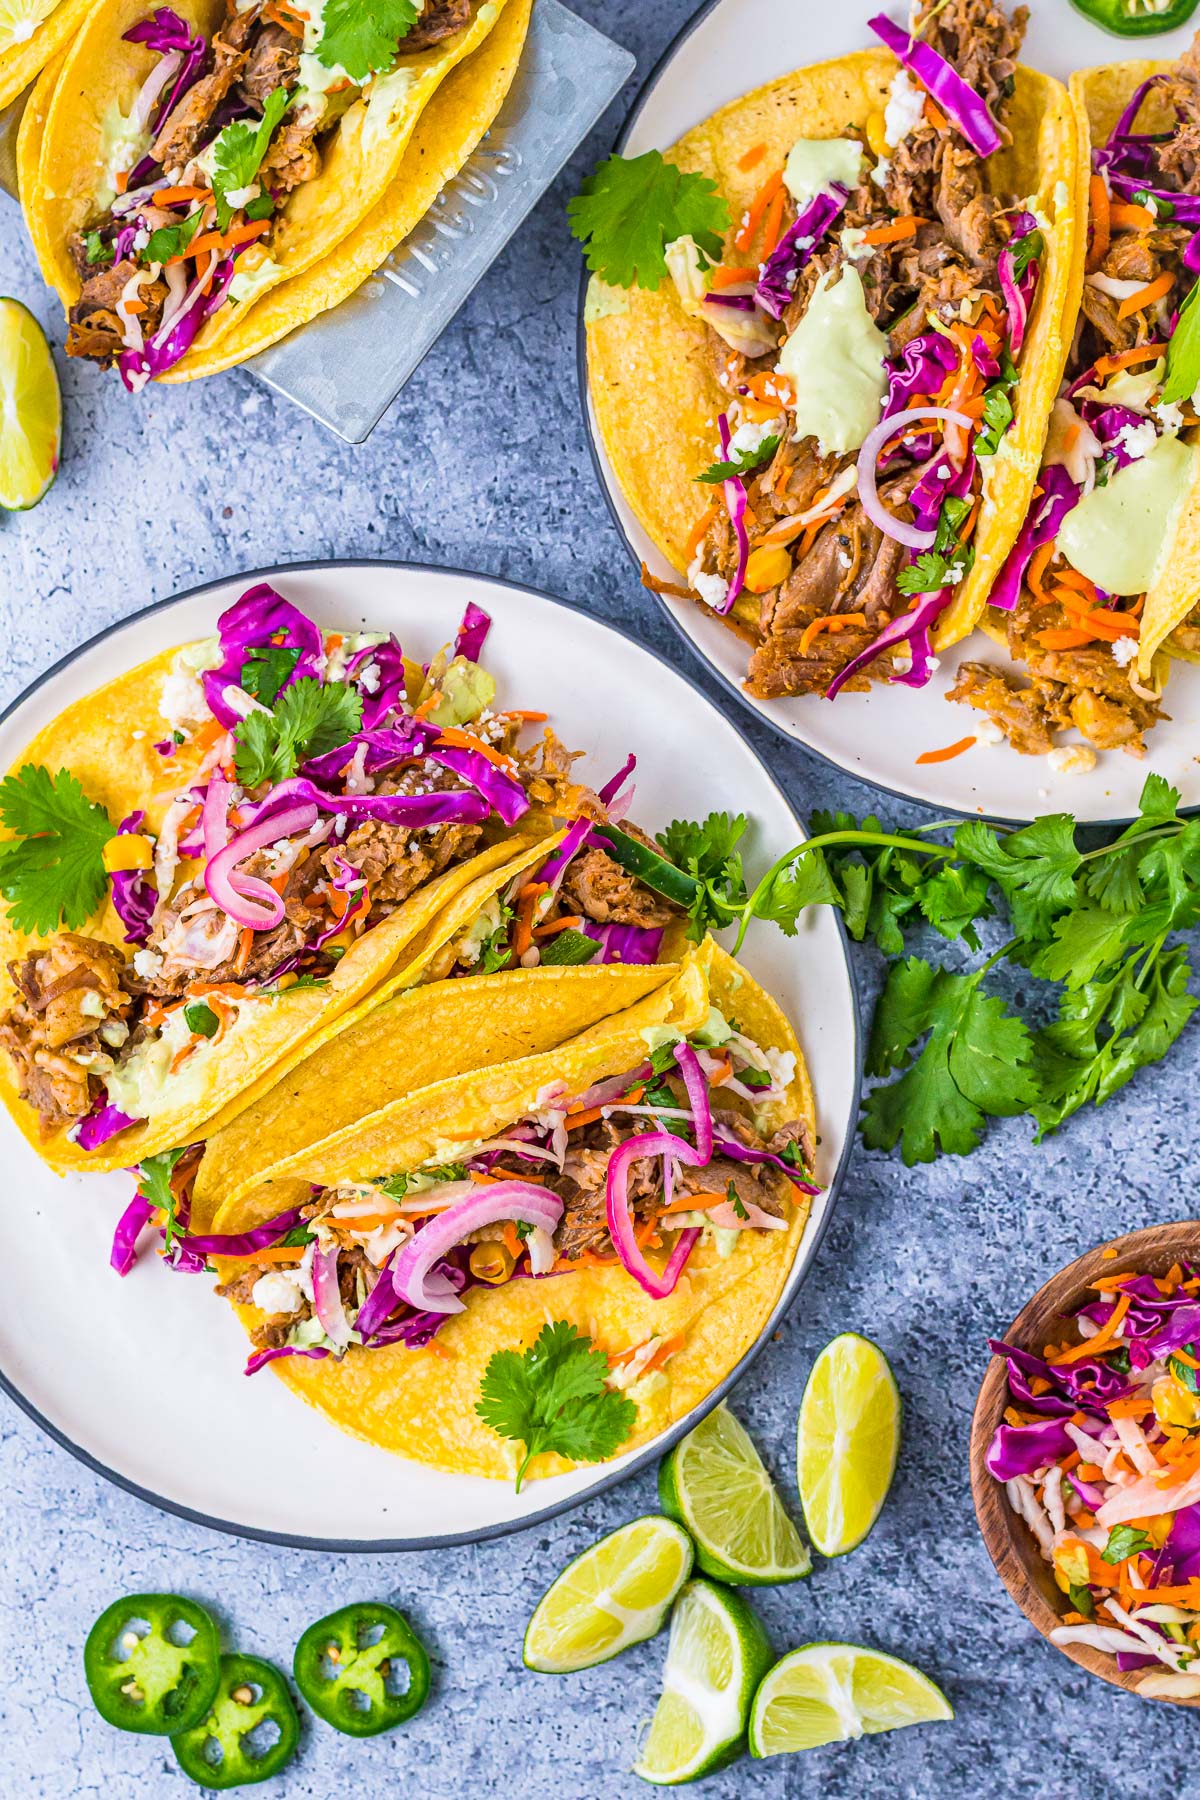 two plates full of tacos with slaw, lime, pickled onion, cilantro, and pulled pork